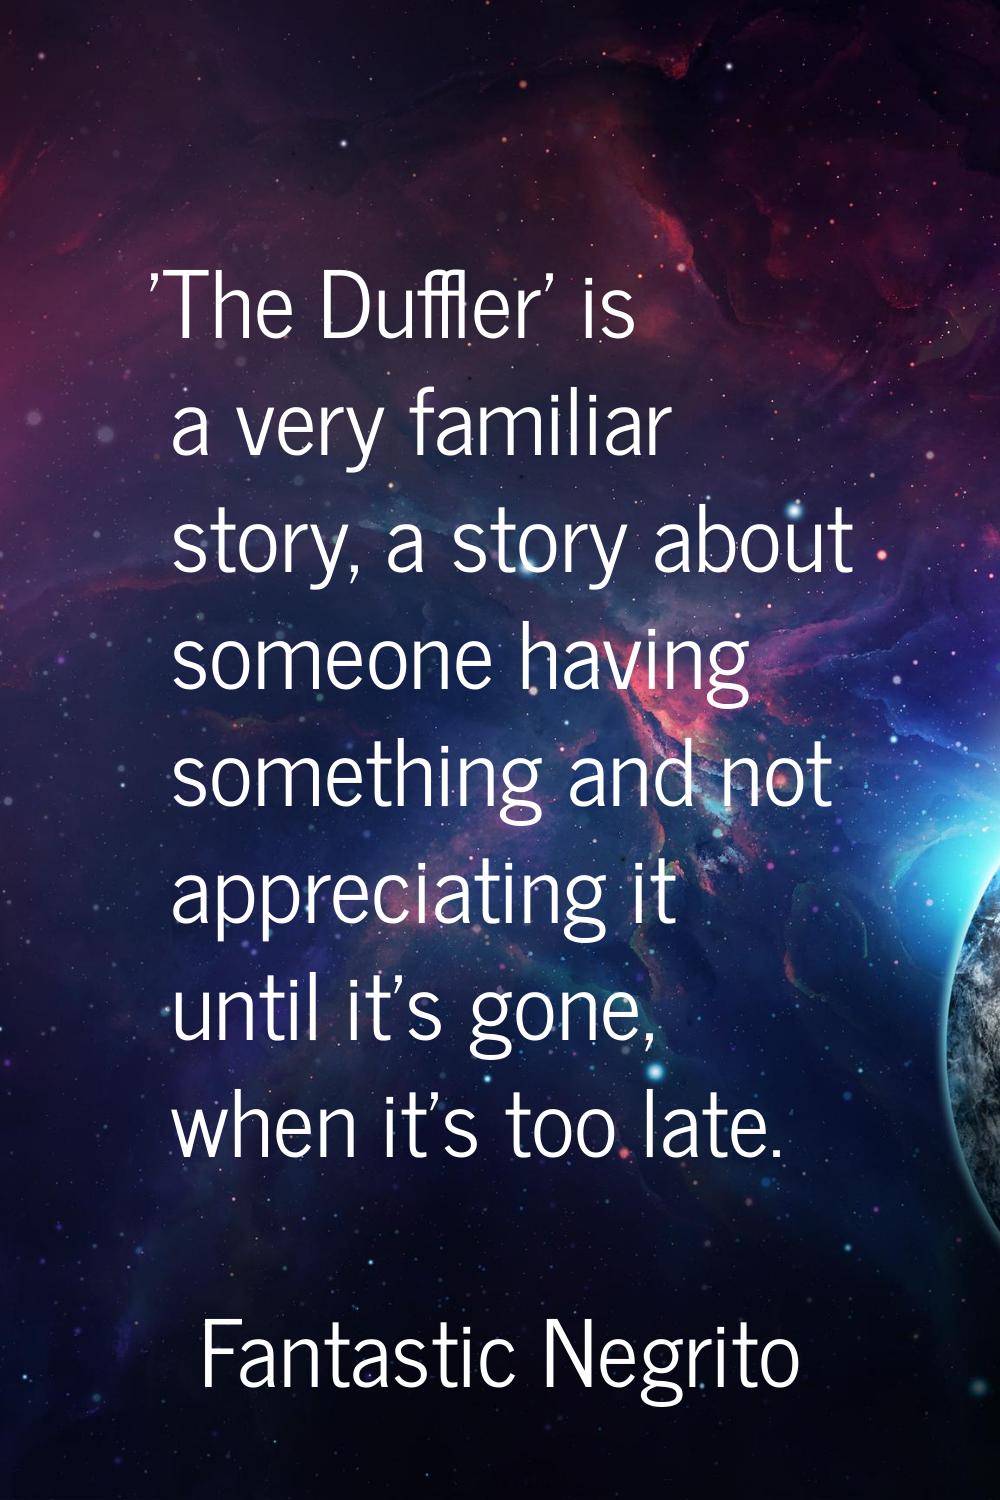 'The Duffler' is a very familiar story, a story about someone having something and not appreciating